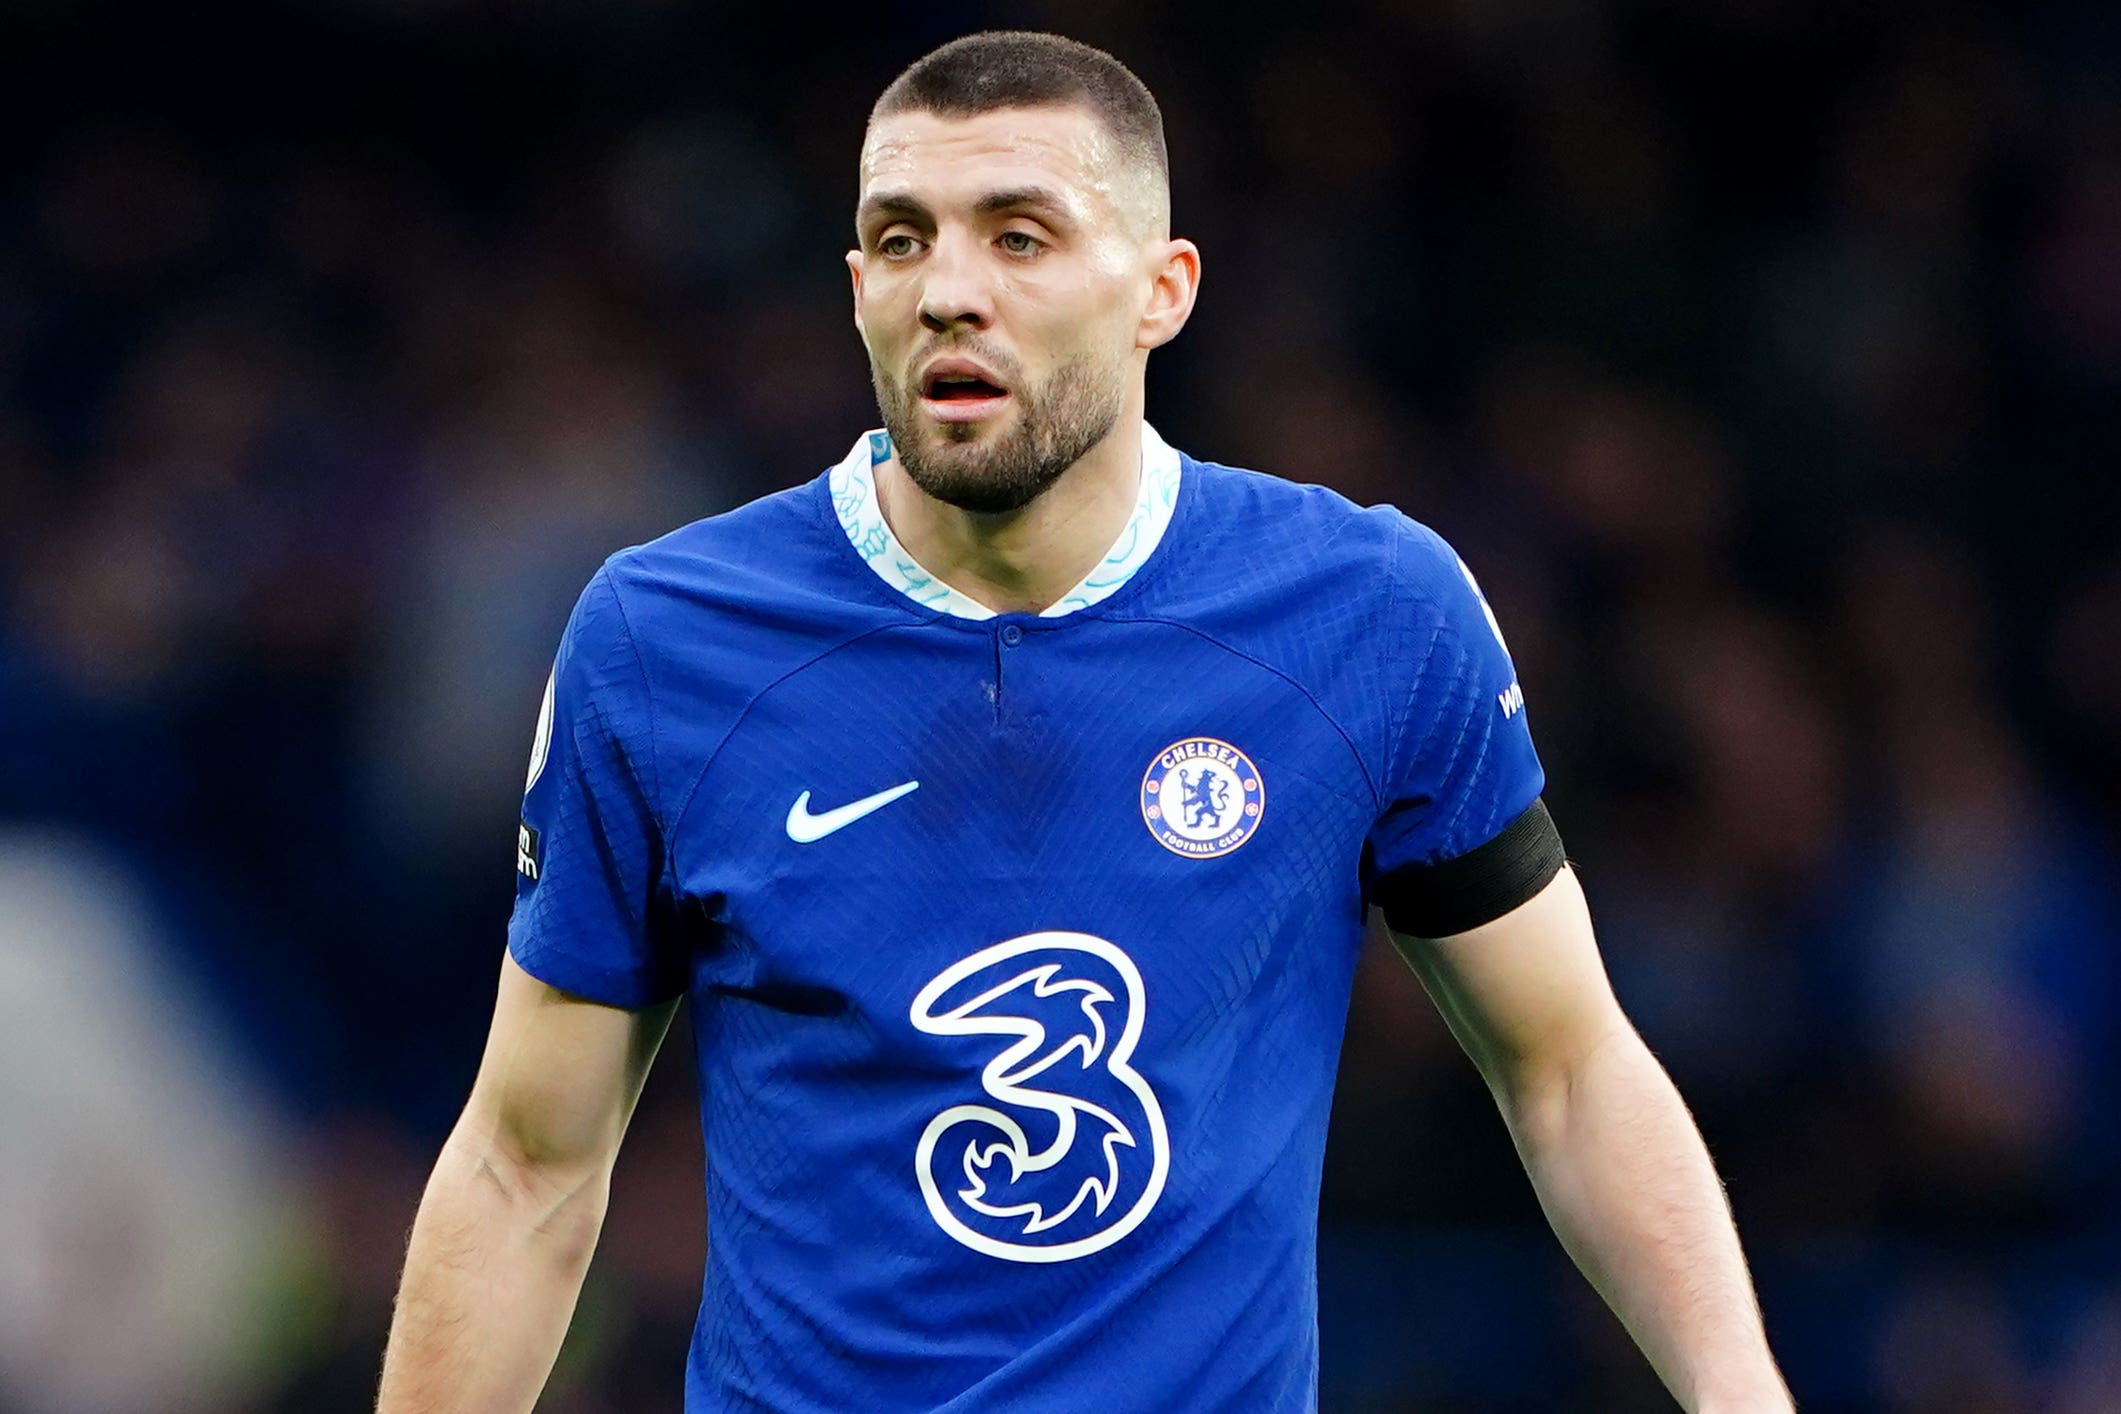 Mateo Kovacic completes move from Chelsea to Manchester City | The Independent